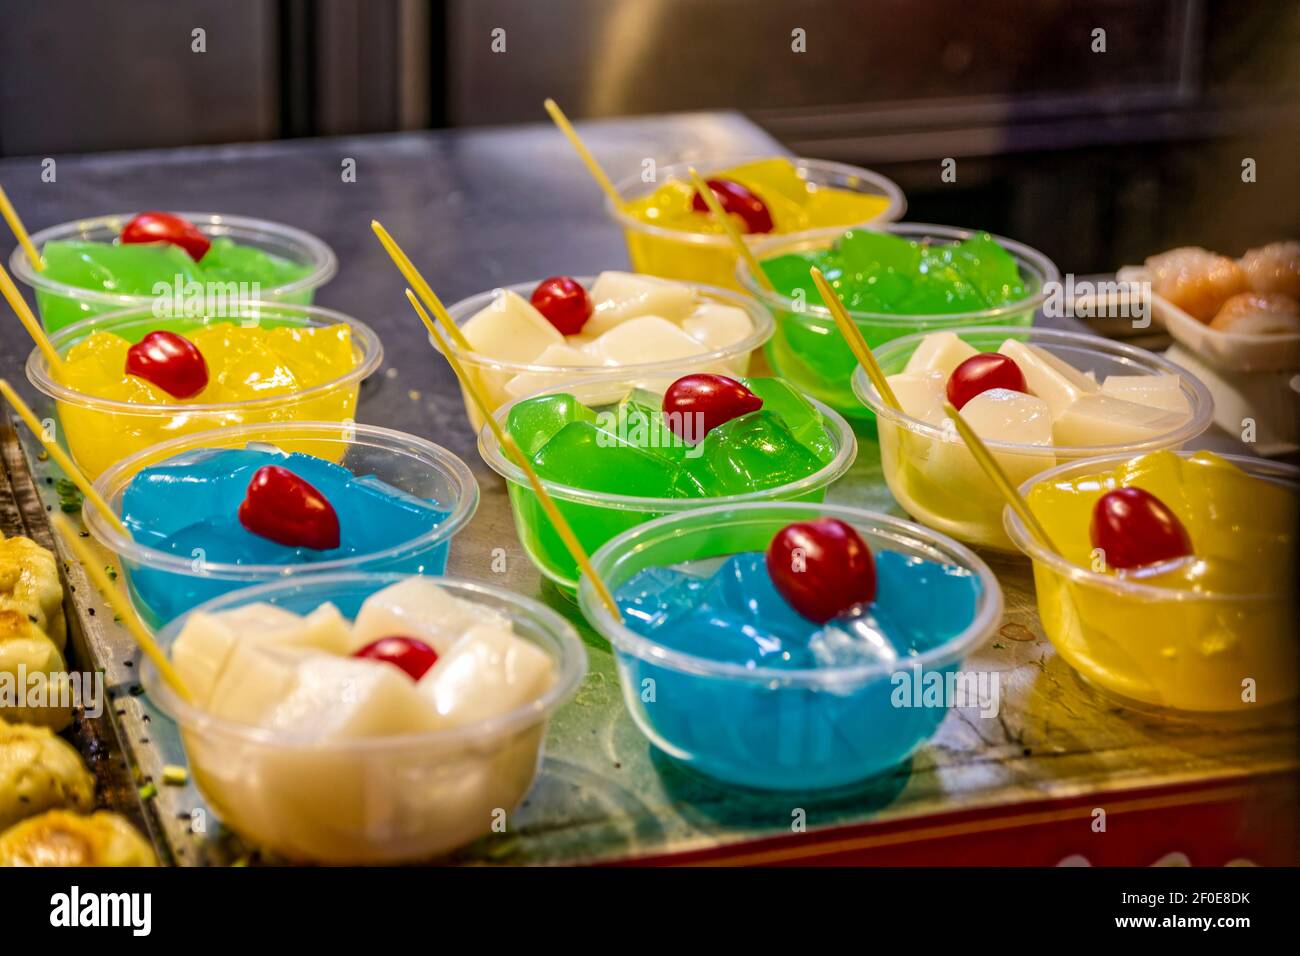 Beijing, China. 2nd June, 2017. Sweets offered to customers in Donghuamen Night Market in Beijing, China. Stock Photo